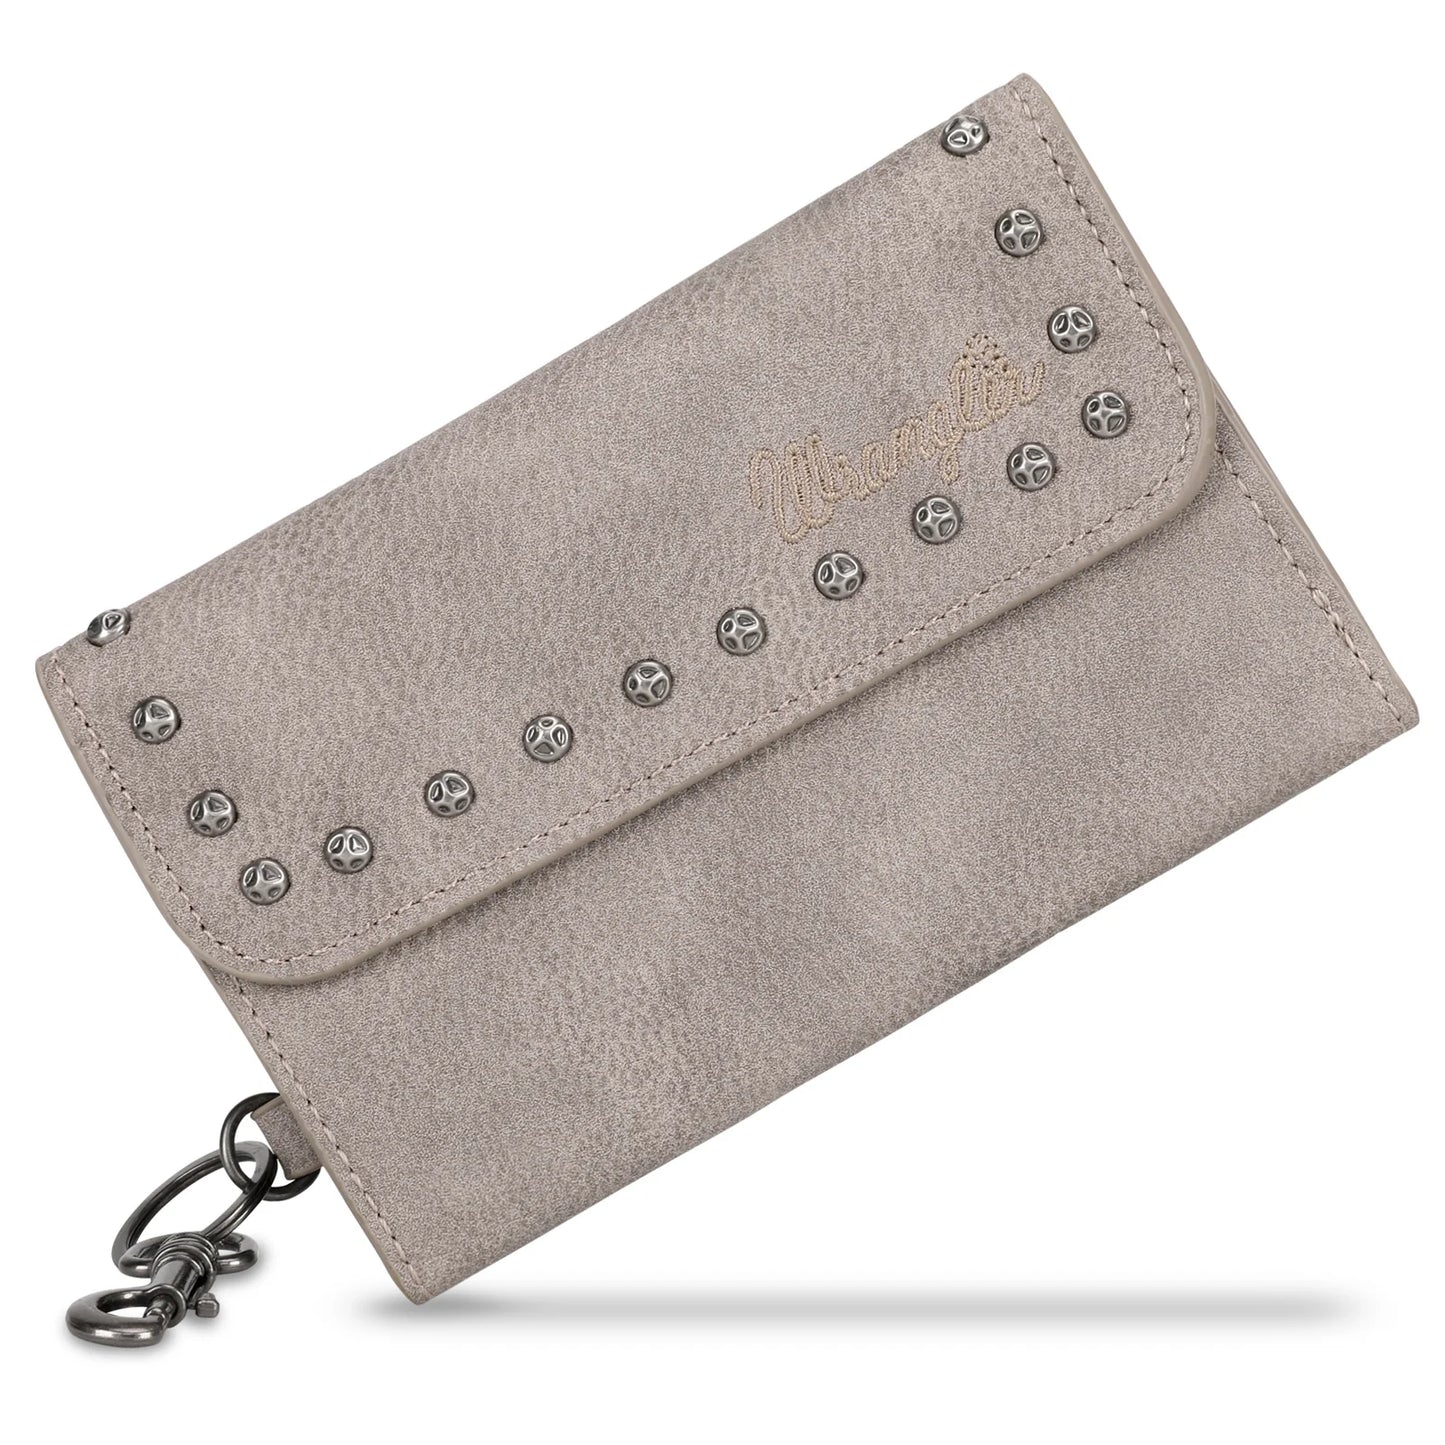 Wrangler Studded Accents Wallet - The Salty Mare